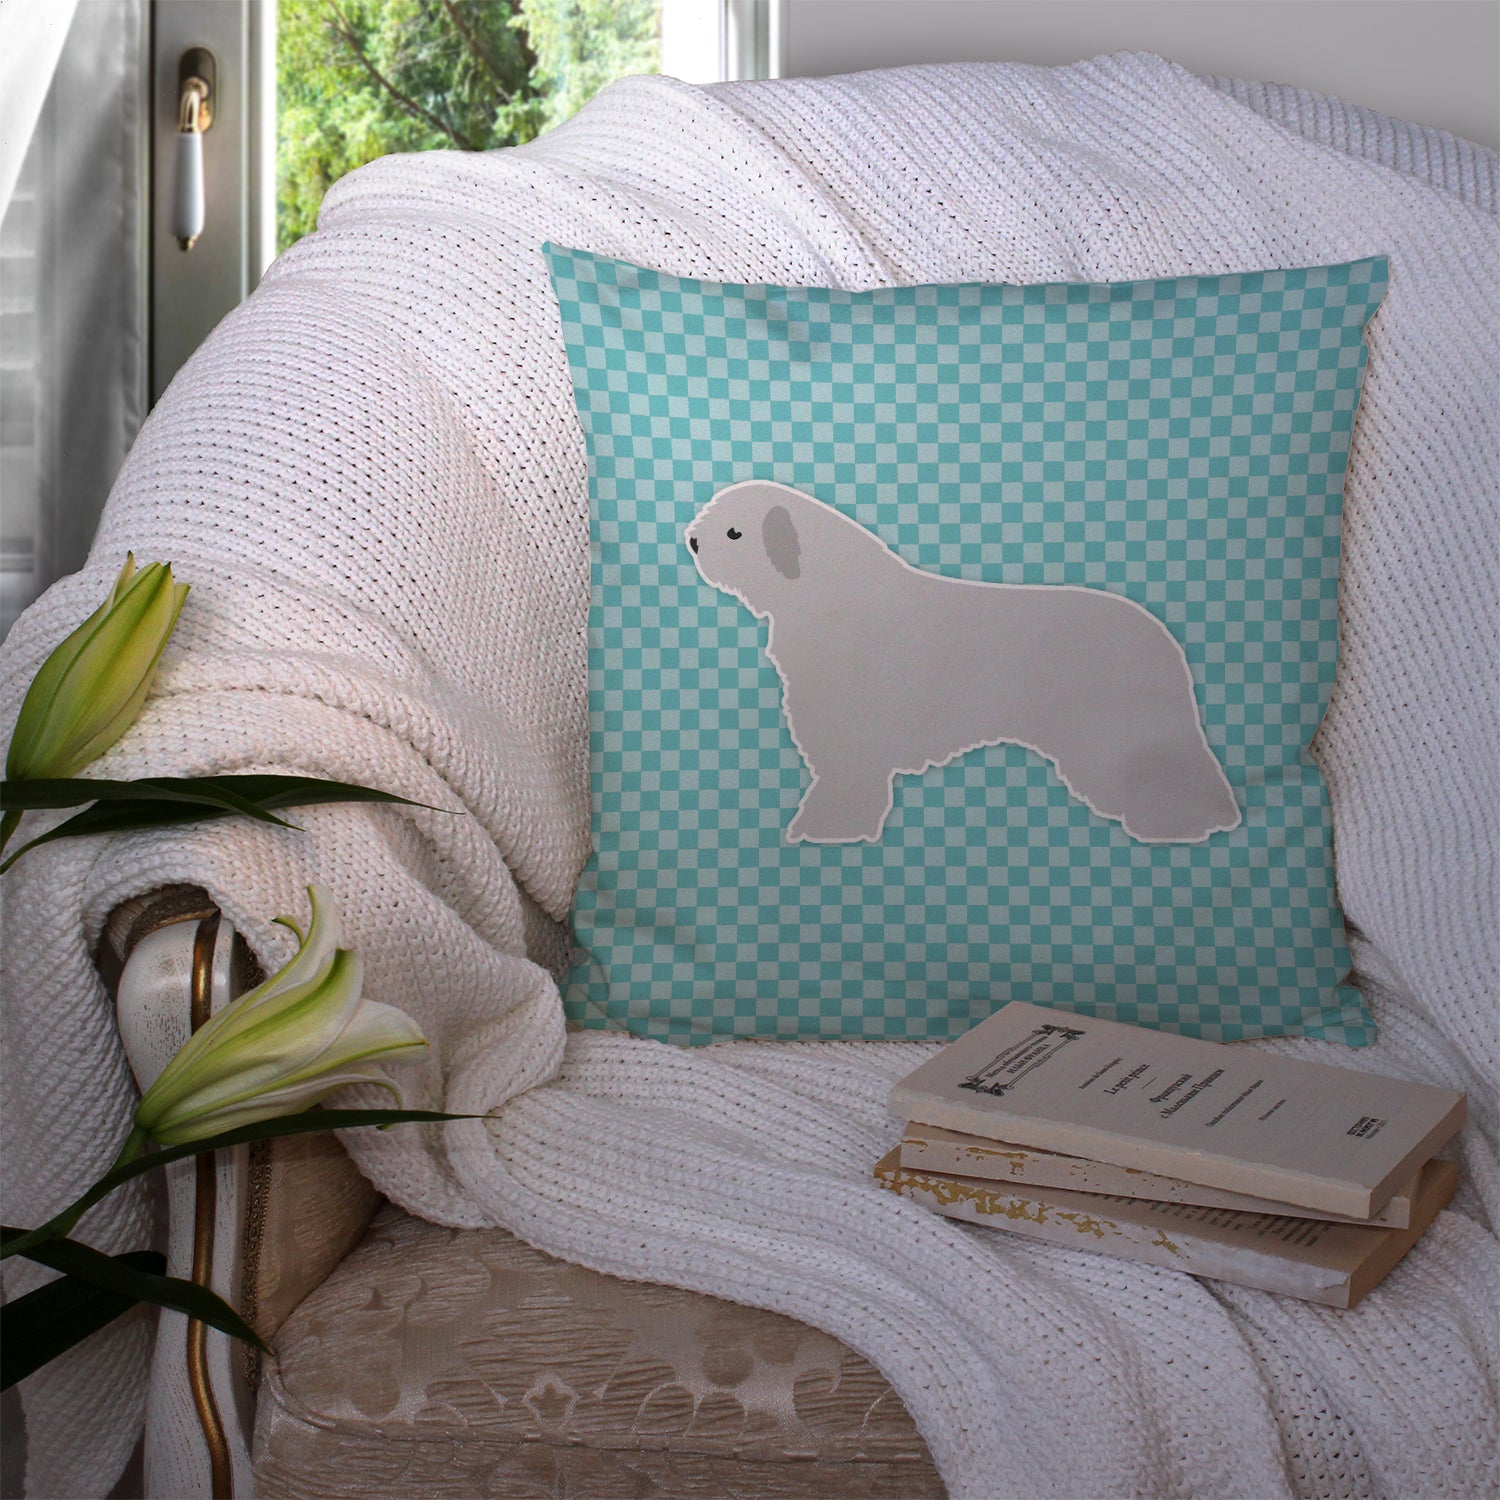 Spanish Water Dog Checkerboard Blue Fabric Decorative Pillow BB3715PW1414 - the-store.com